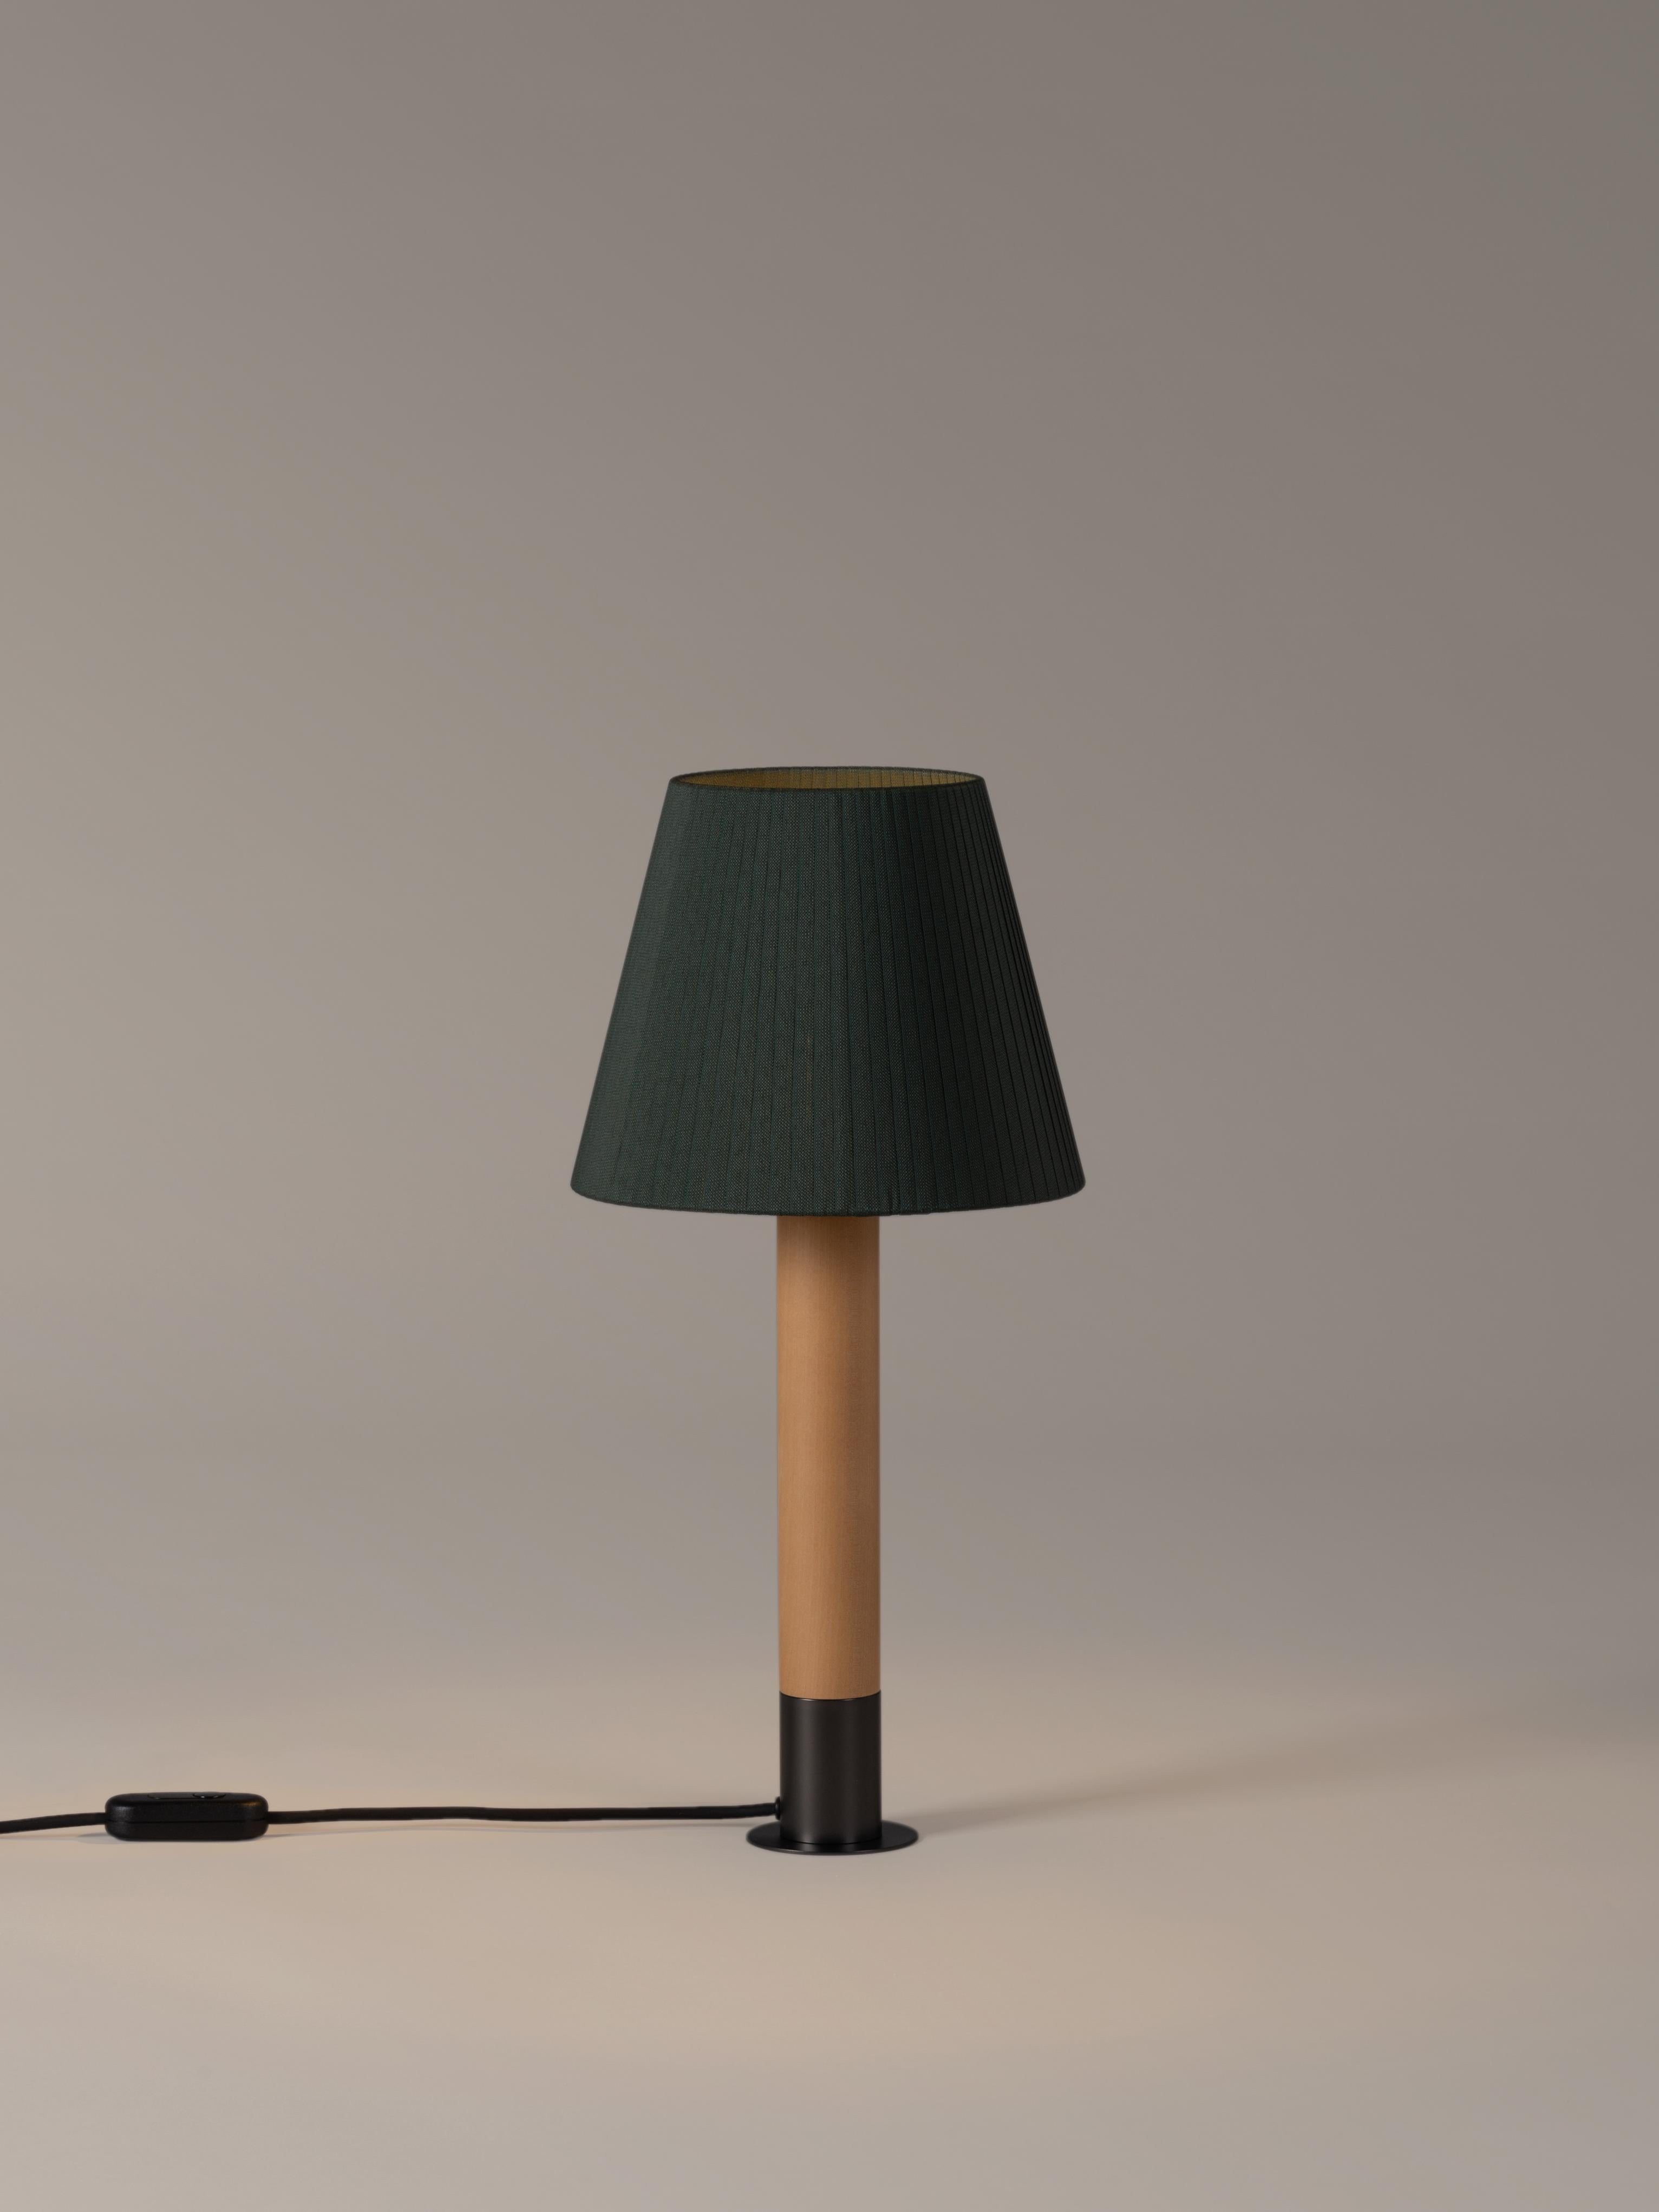 Bronze and green Básica M1 table lamp by Santiago Roqueta, Santa & Cole
Dimensions: D 25 x H 52 cm
Materials: Bronze, birch wood, ribbon.
Available in other shade colors and with or without the stabilizing disc.
Available in nickel or